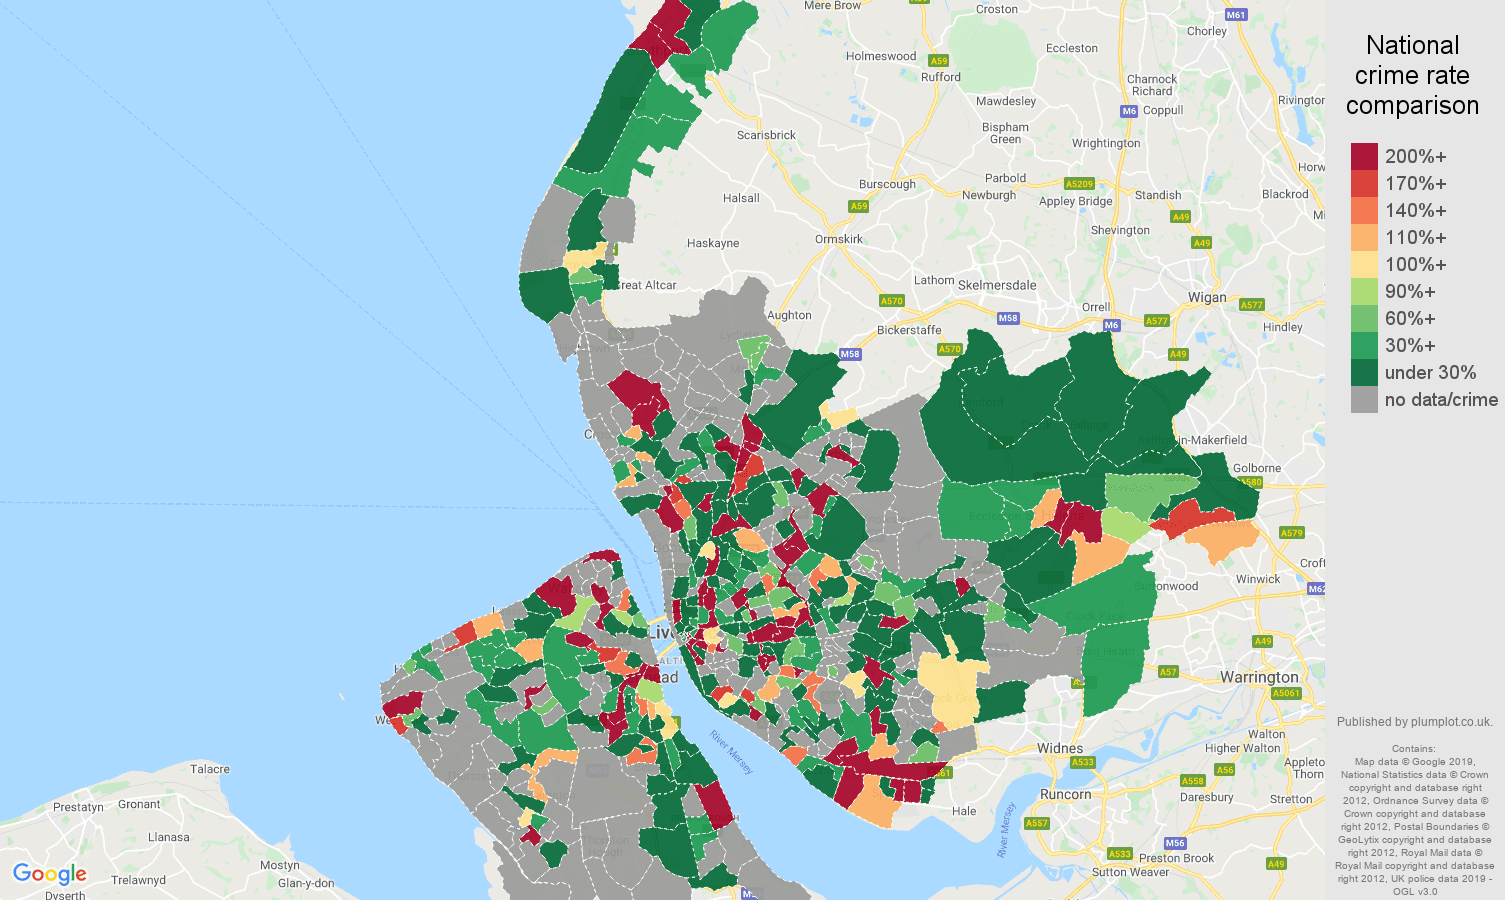 Merseyside shoplifting crime rate comparison map